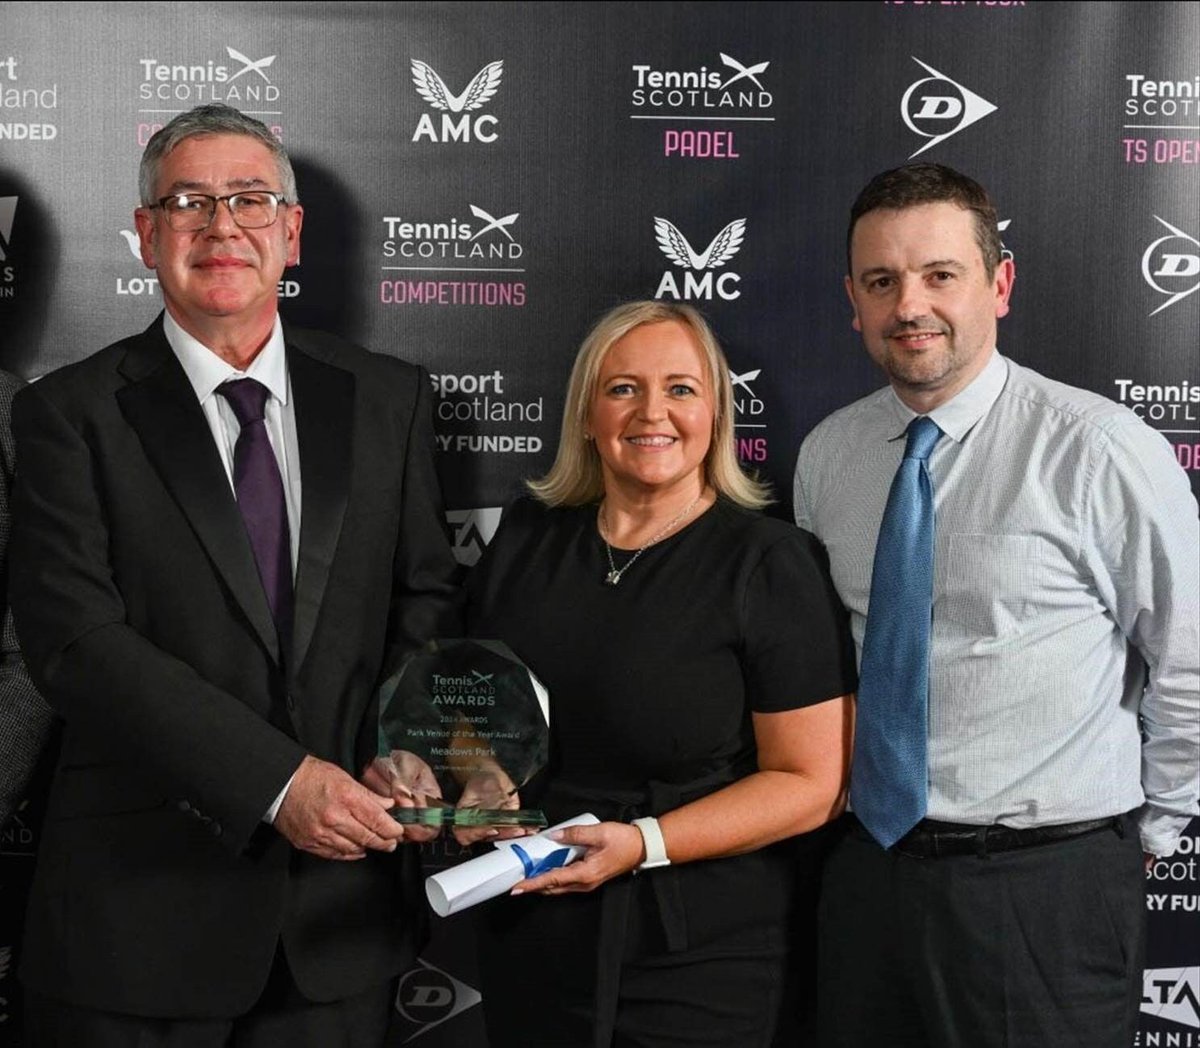 Meadows Tennis has won Tennis Scotland's Park Venue of the Year Award! The award recognises coaching, community engagement and growing tennis participation in their area. Well done to the team at Meadows Tennis for all their hard work and dedication. tinyurl.com/bdwr25an